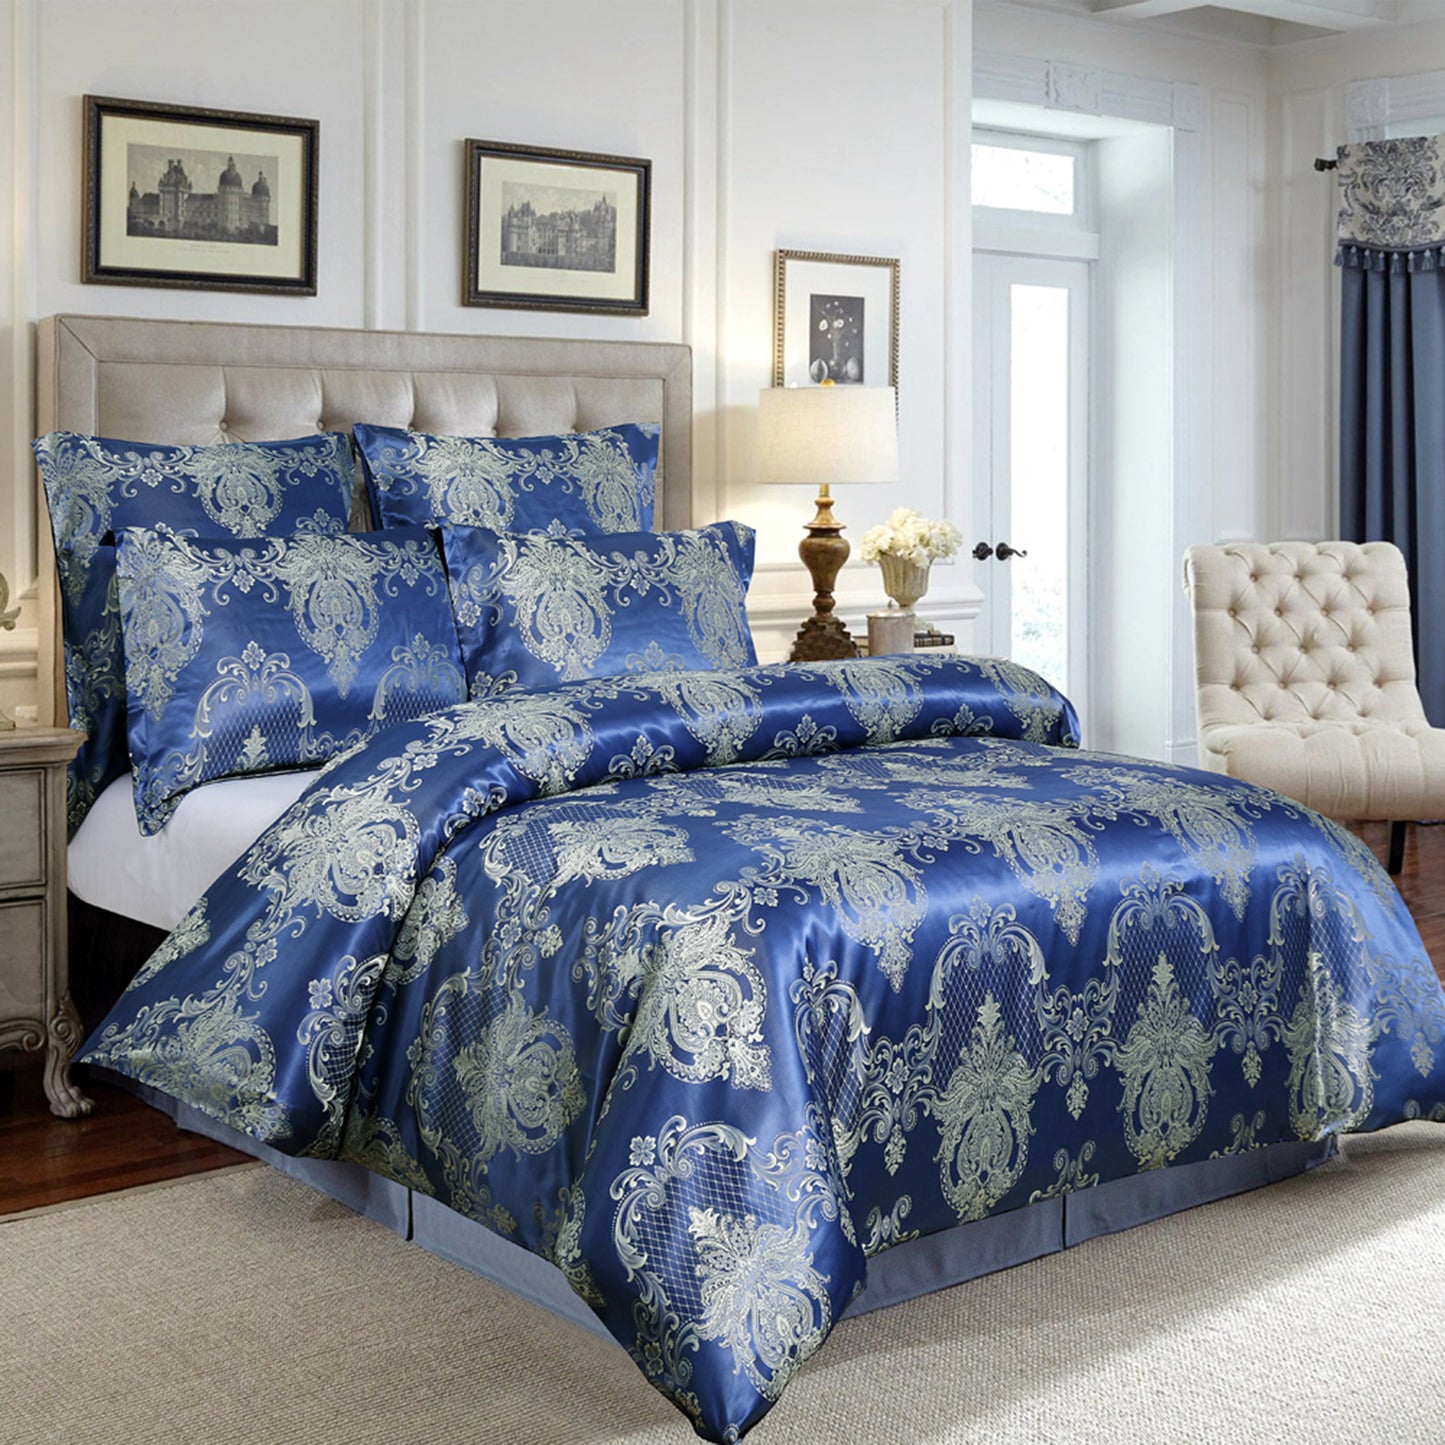 WONGS BEDDING Bright Blue Embroidery Satin Craft Duvet Cover Set With 2 Pillow Case